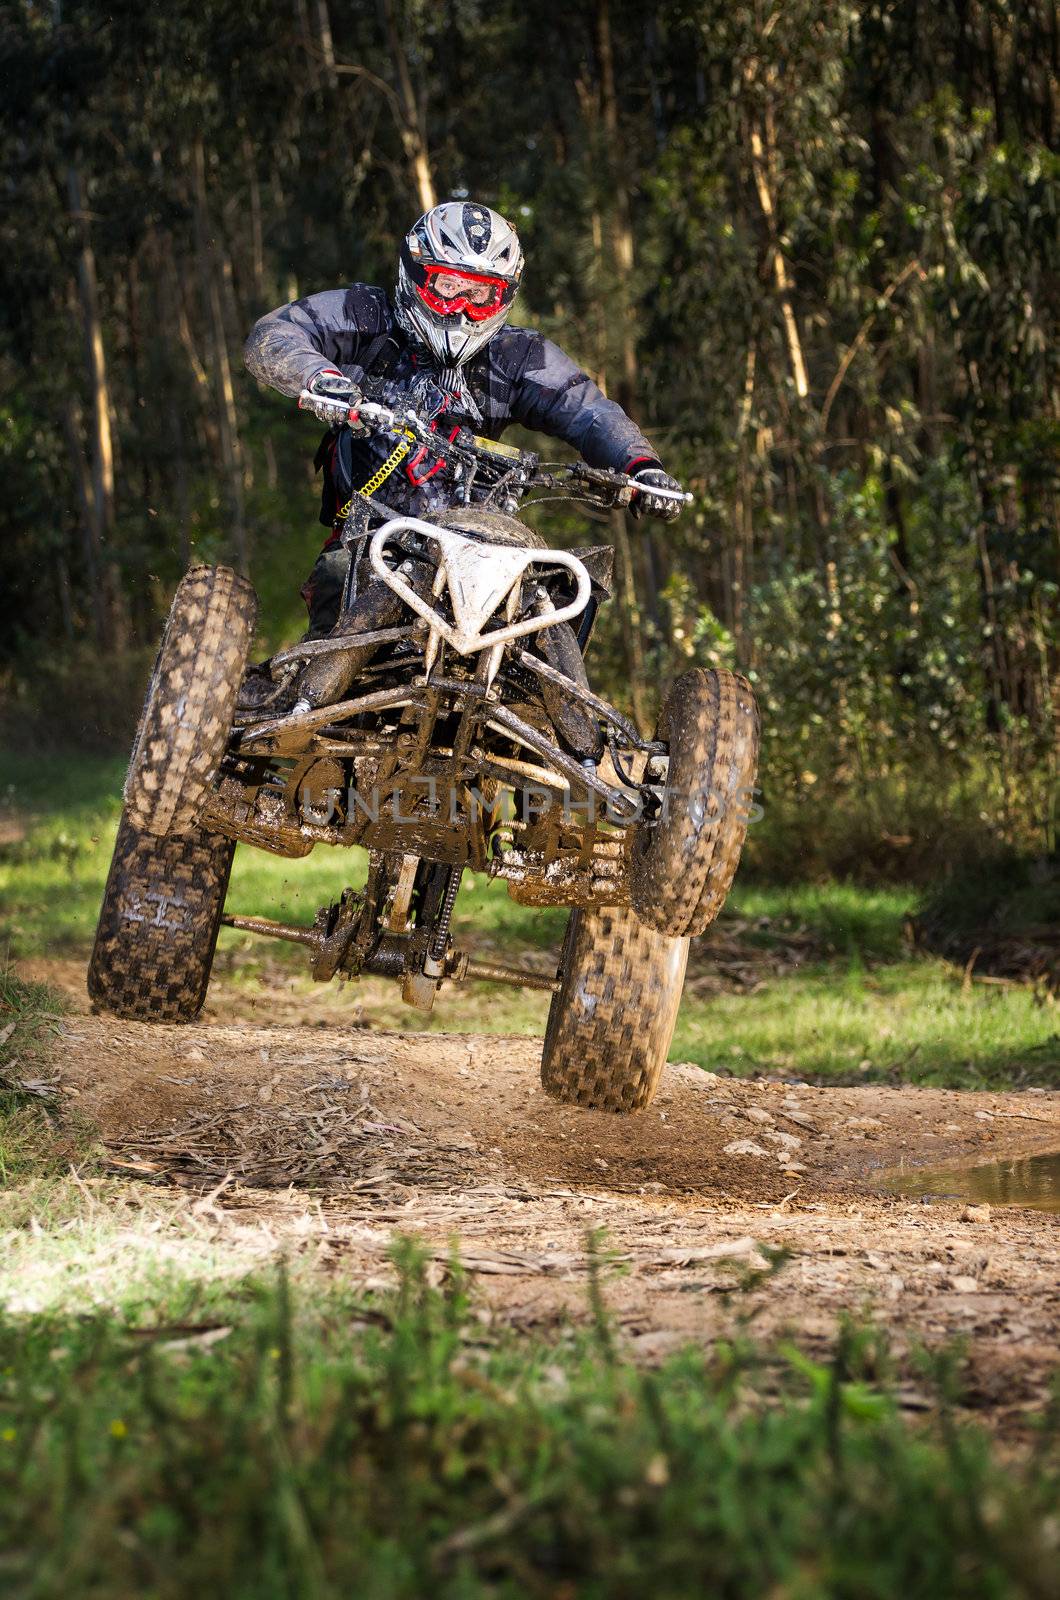 Quad rider jumping on a forest trail.